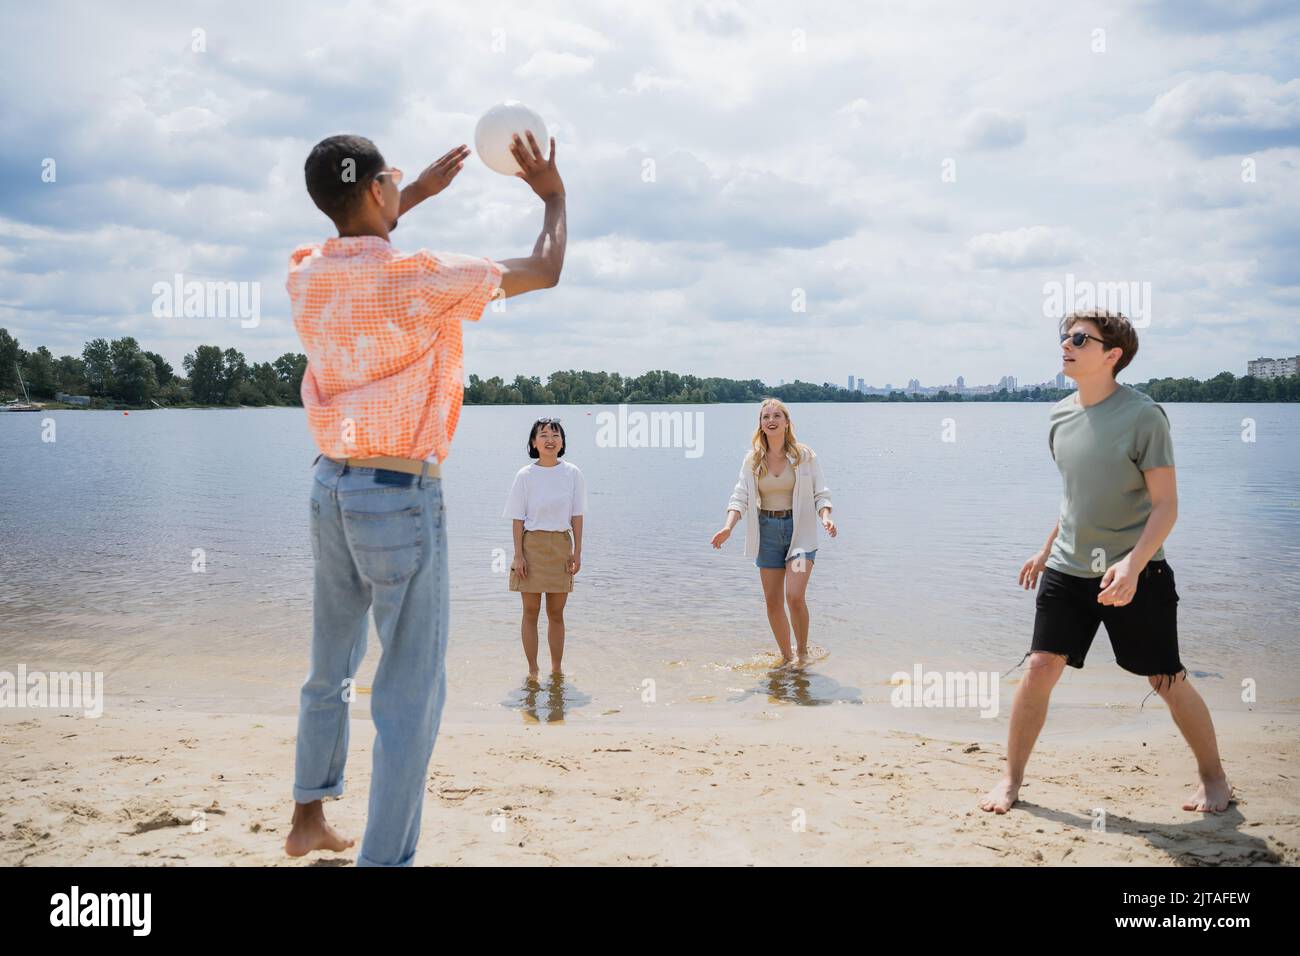 african american man passing ball while playing beach volleyball with multiethnic friends Stock Photo